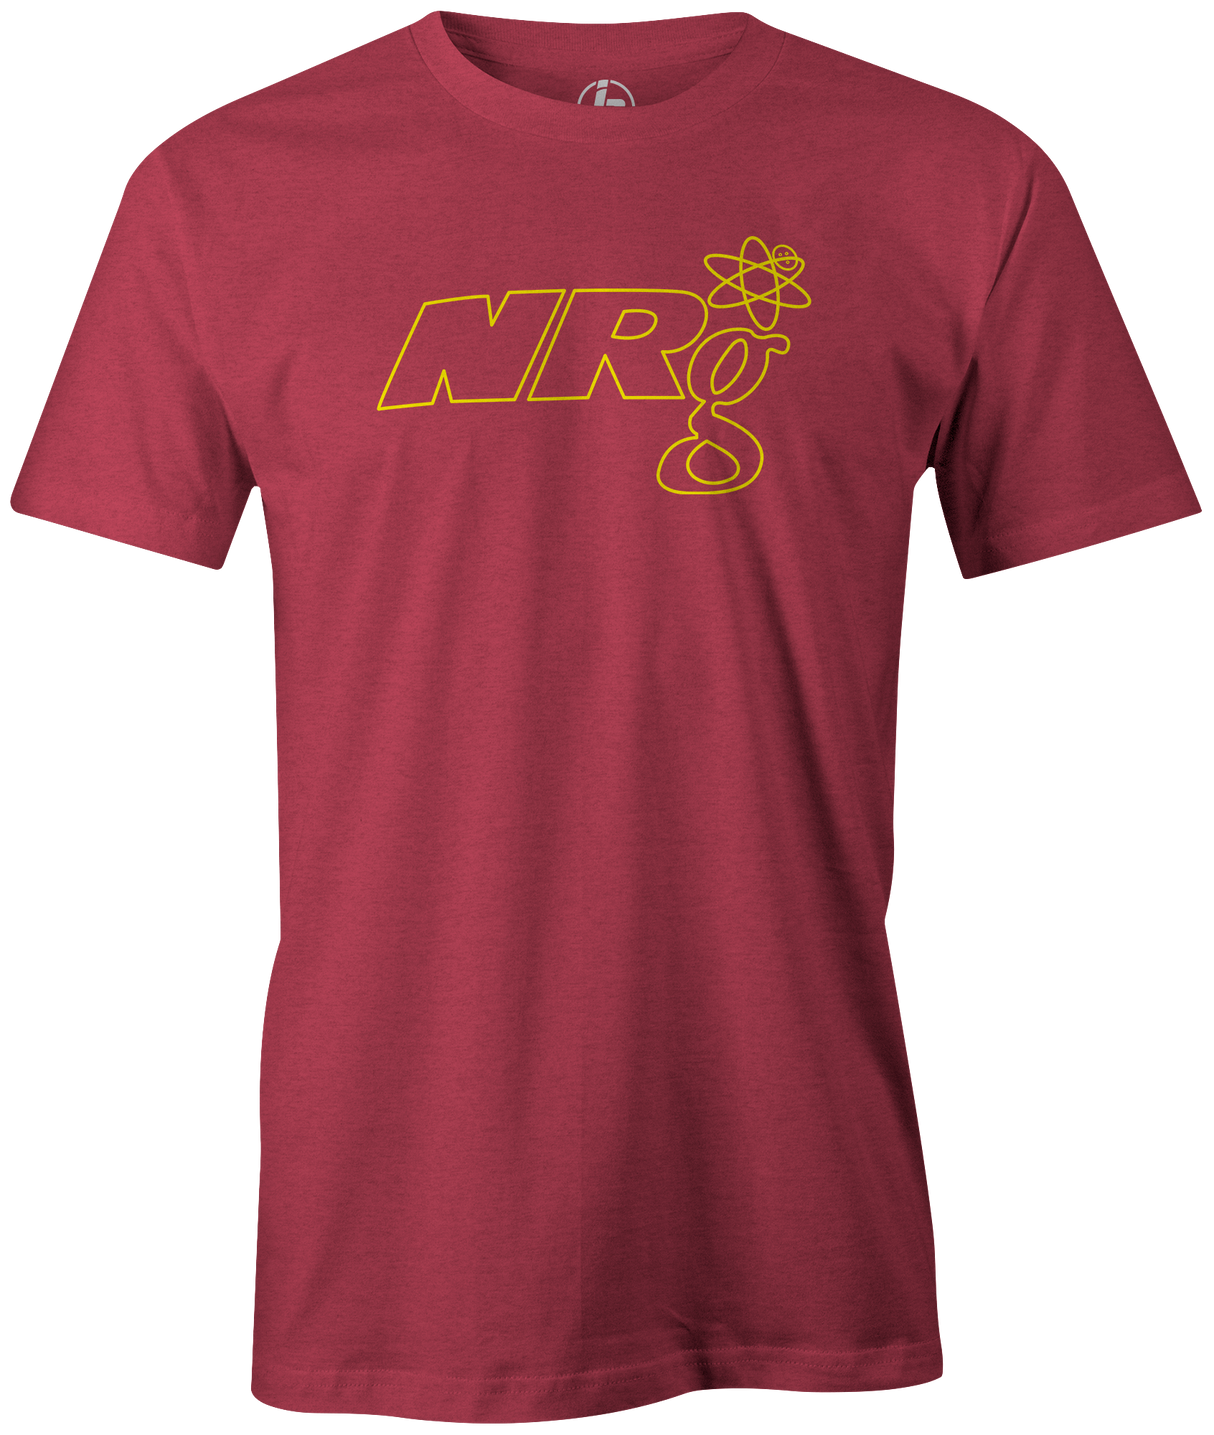 Is it Red or Brown? Either way, we have the t-shirt for you if you loved the Track Bowling NRg bowling ball! This tee is the perfect match to your ball. This awesome bowling t-shirt is the perfect gift for any long time track fan or avid bowler! Hit the lanes with this awesome shirt to roll some strikes! Tshirt, tee, tee-shirt, tee shirt, Pro shop. League bowling team shirt. PBA. PWBA. USBC. Junior Gold. Youth bowling. Tournament t-shirt. Men's. Bowling Ball. Track Bowling.